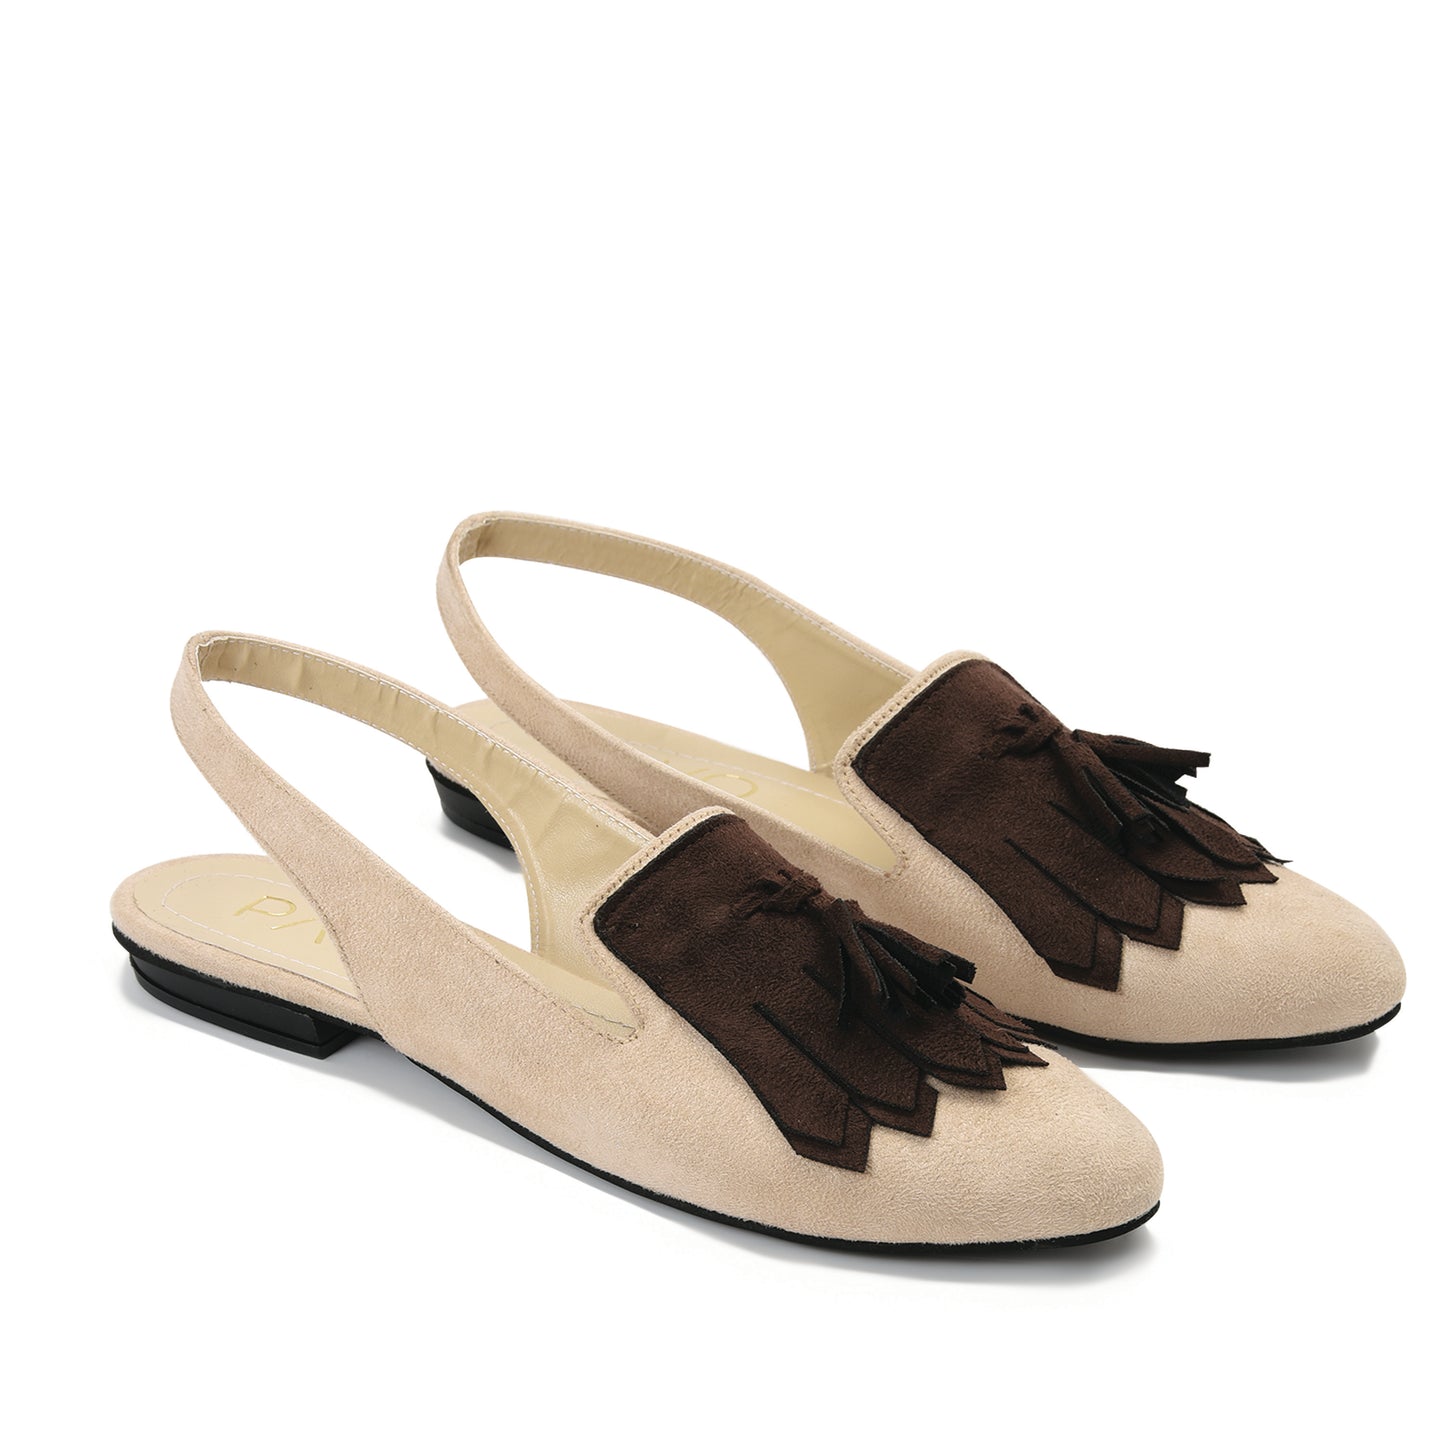 Sira Beige shoes with Brown suede-6002